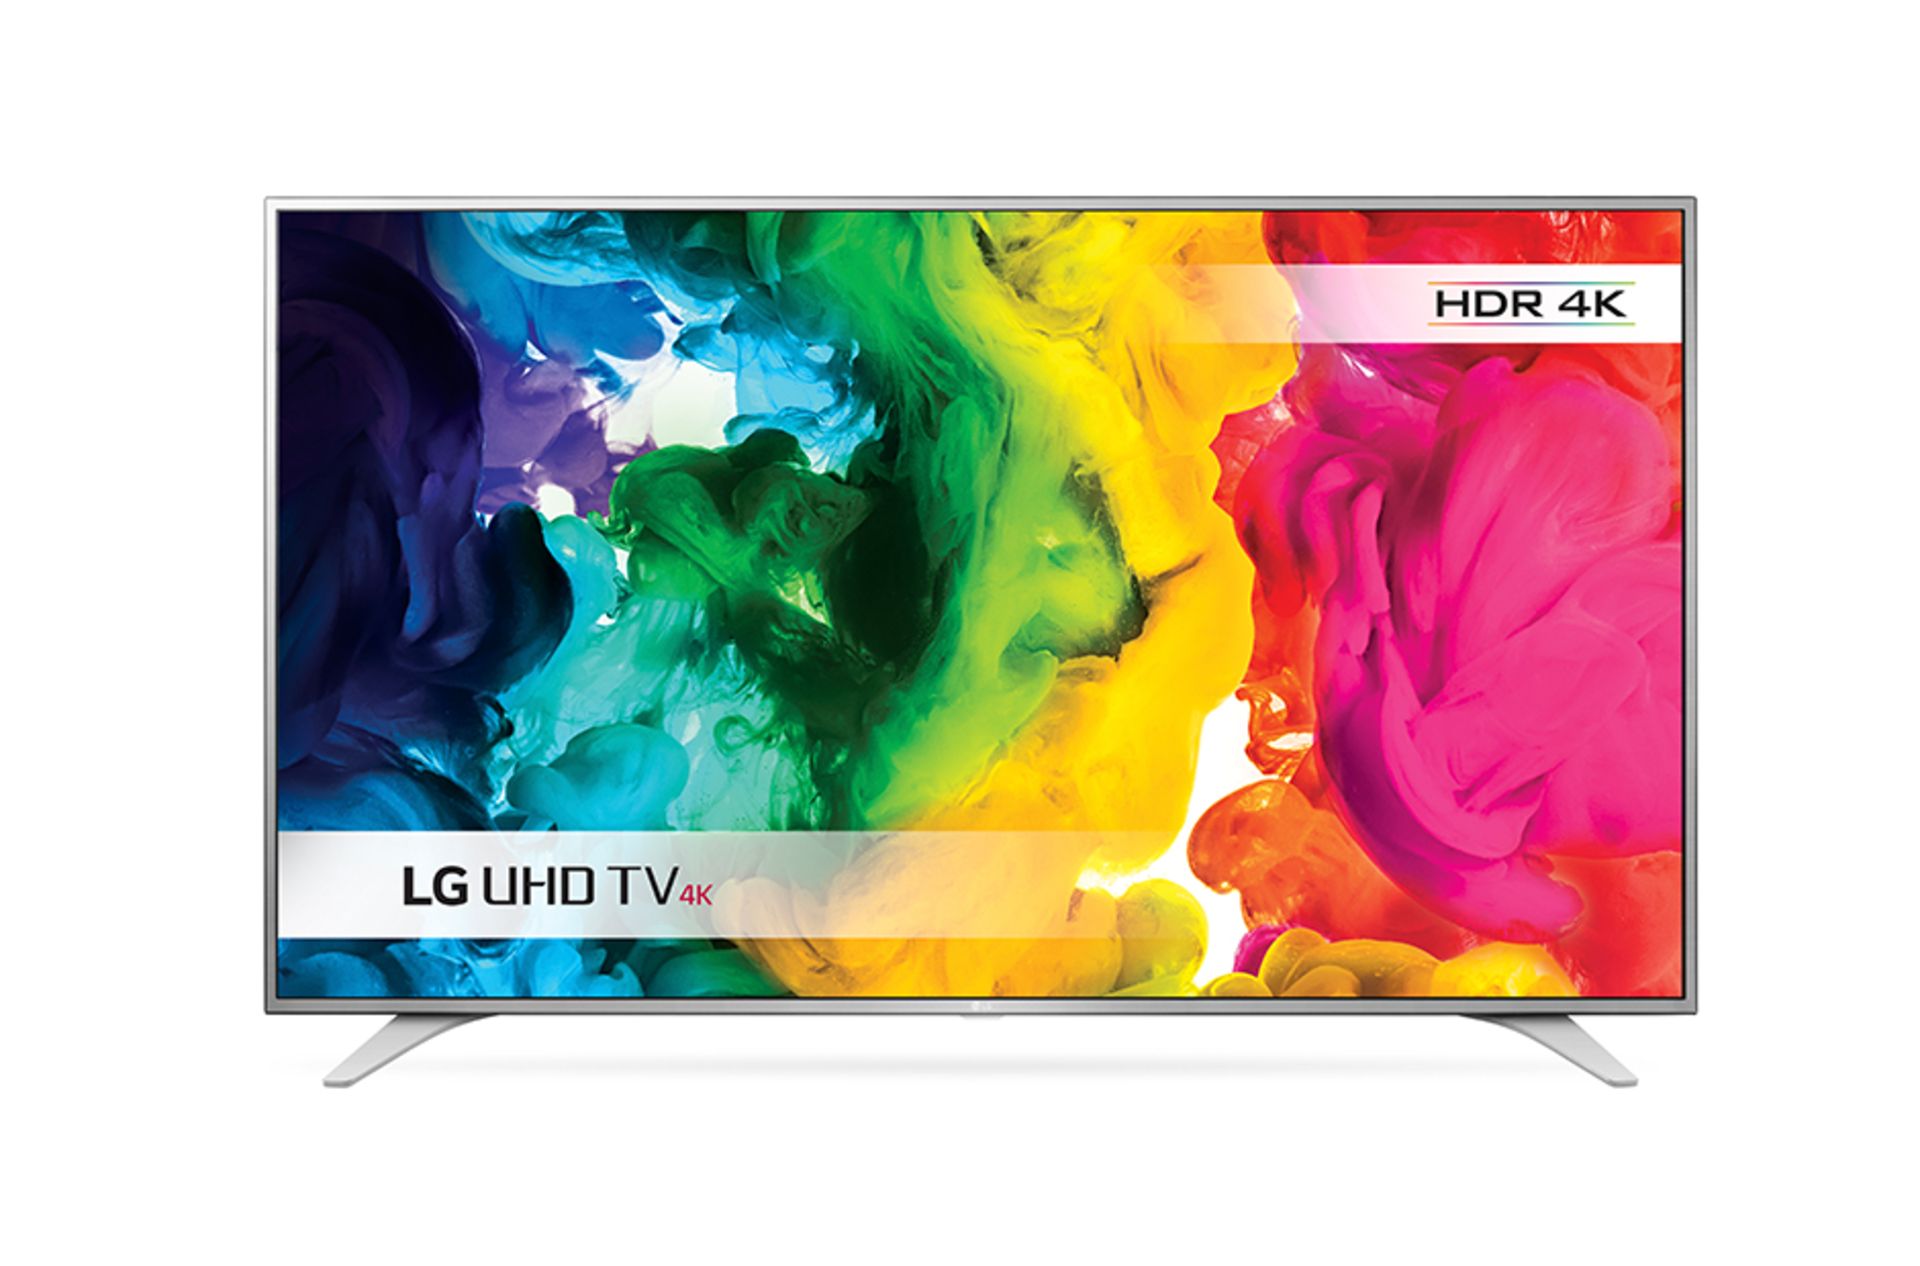 V Grade A LG 49 Inch HDR 4K ULTRA HD LED SMART TV WITH FREEVIEW HD & WEBOS 3.0 & WIFI 49UH650V